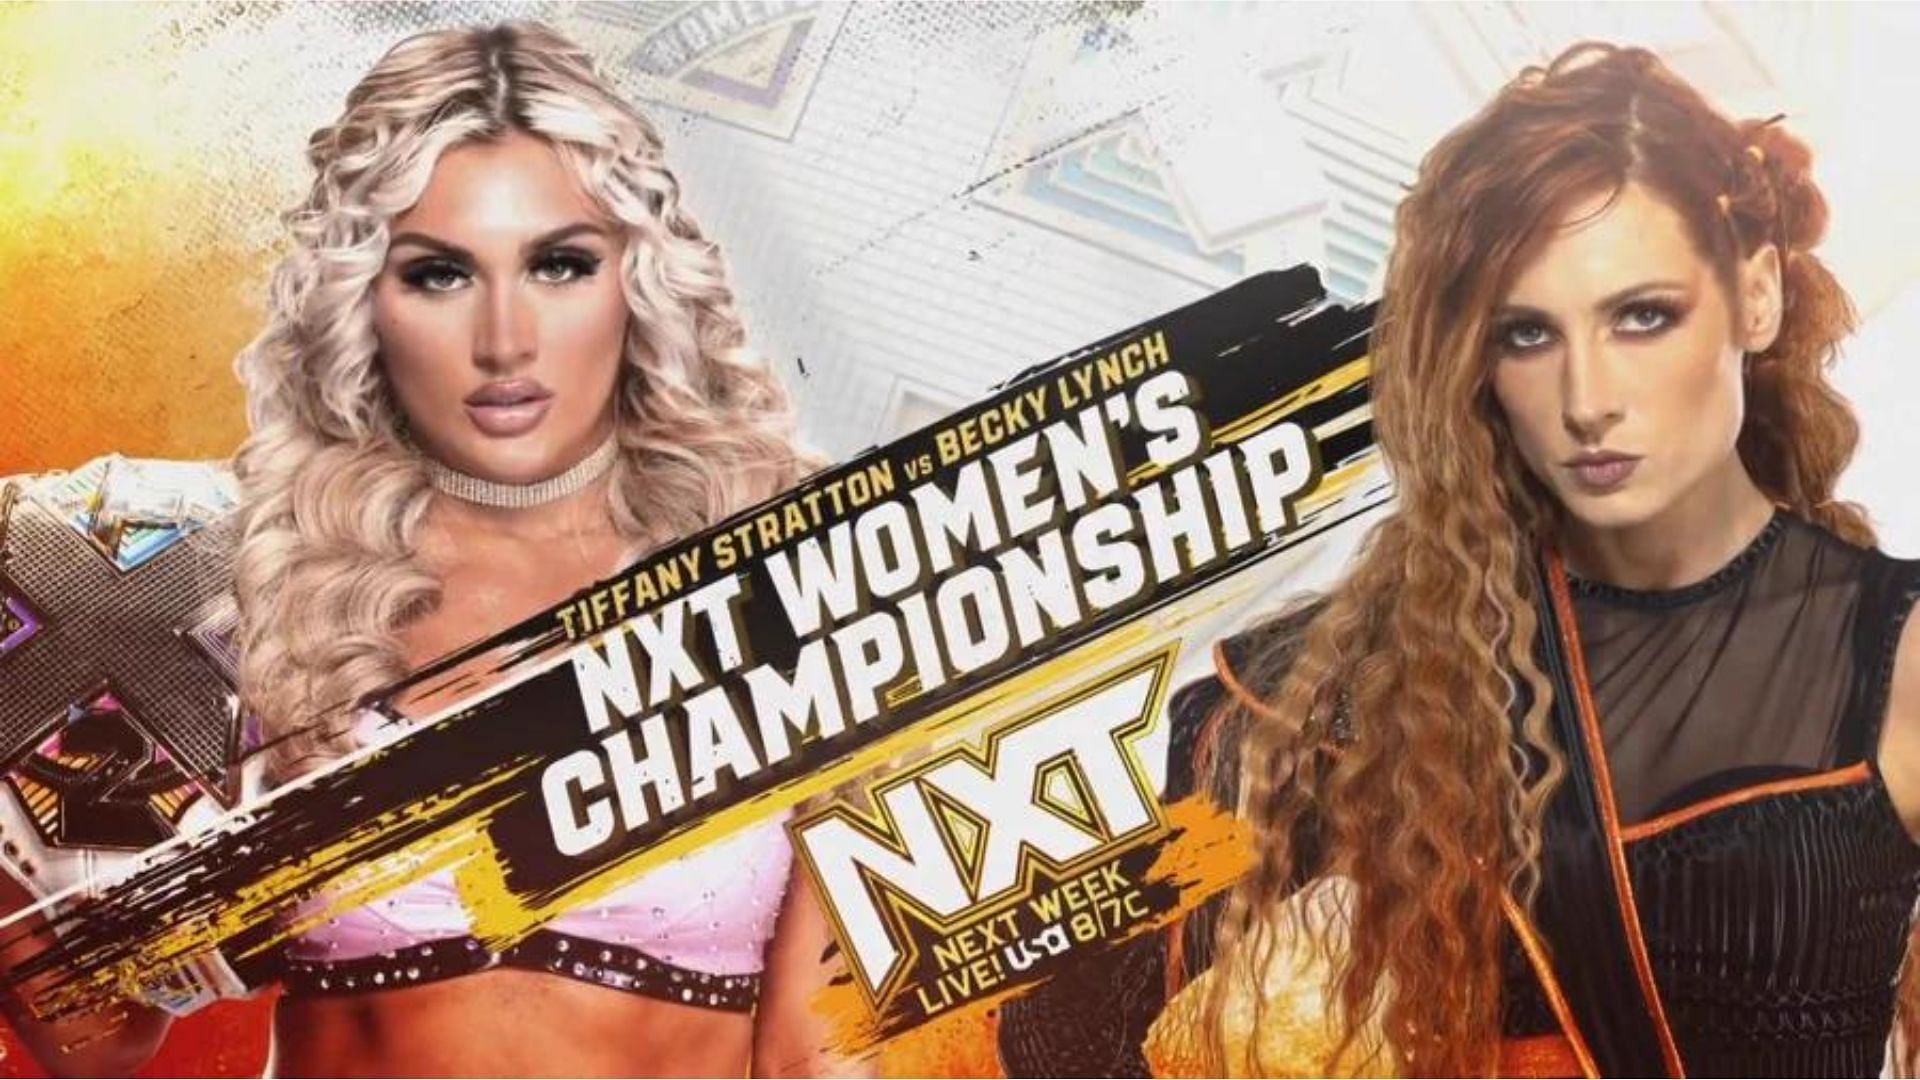 Becky challenges Stratton for the title